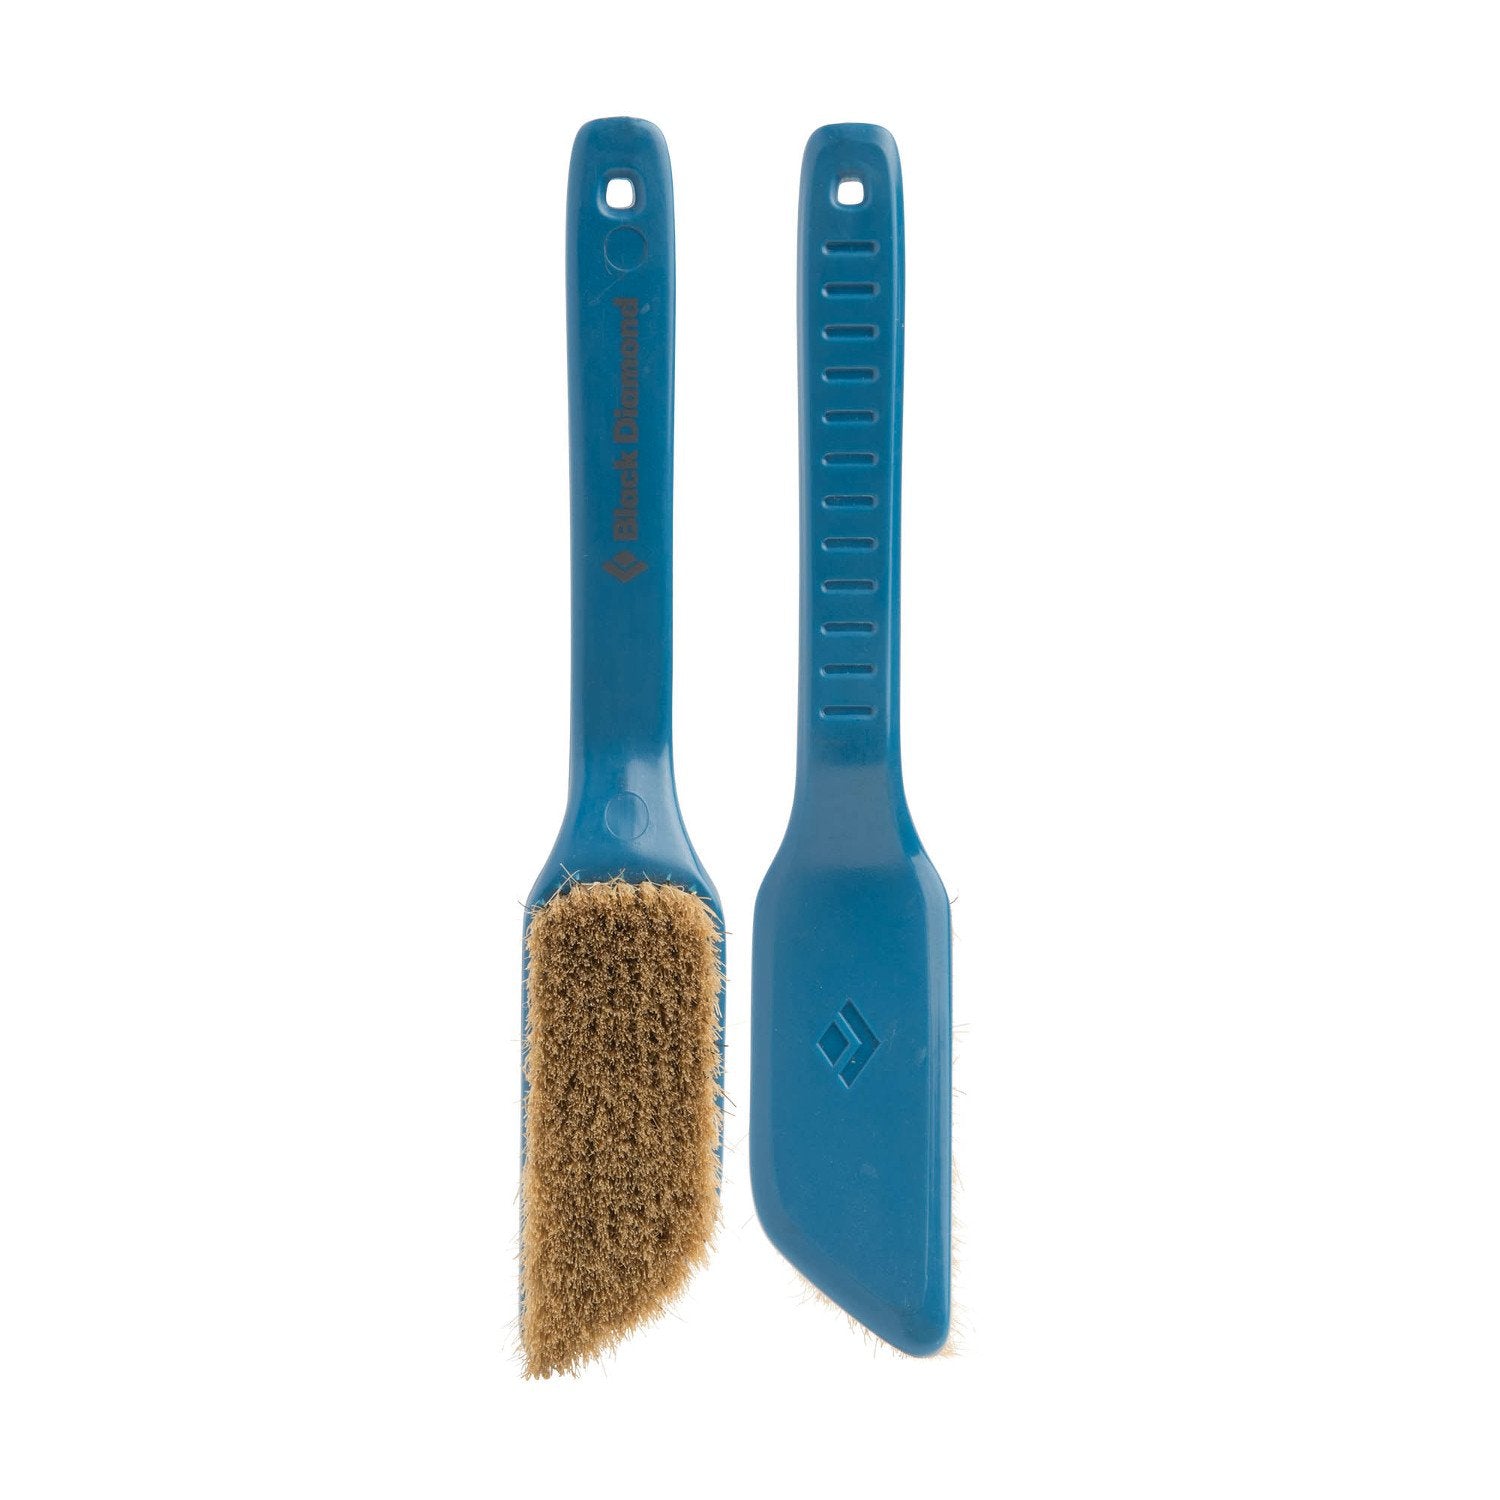 Pair of blue Black Diamond Boars Hair Brushes - Medium, 1 shown facing and 1 shown in the reverse